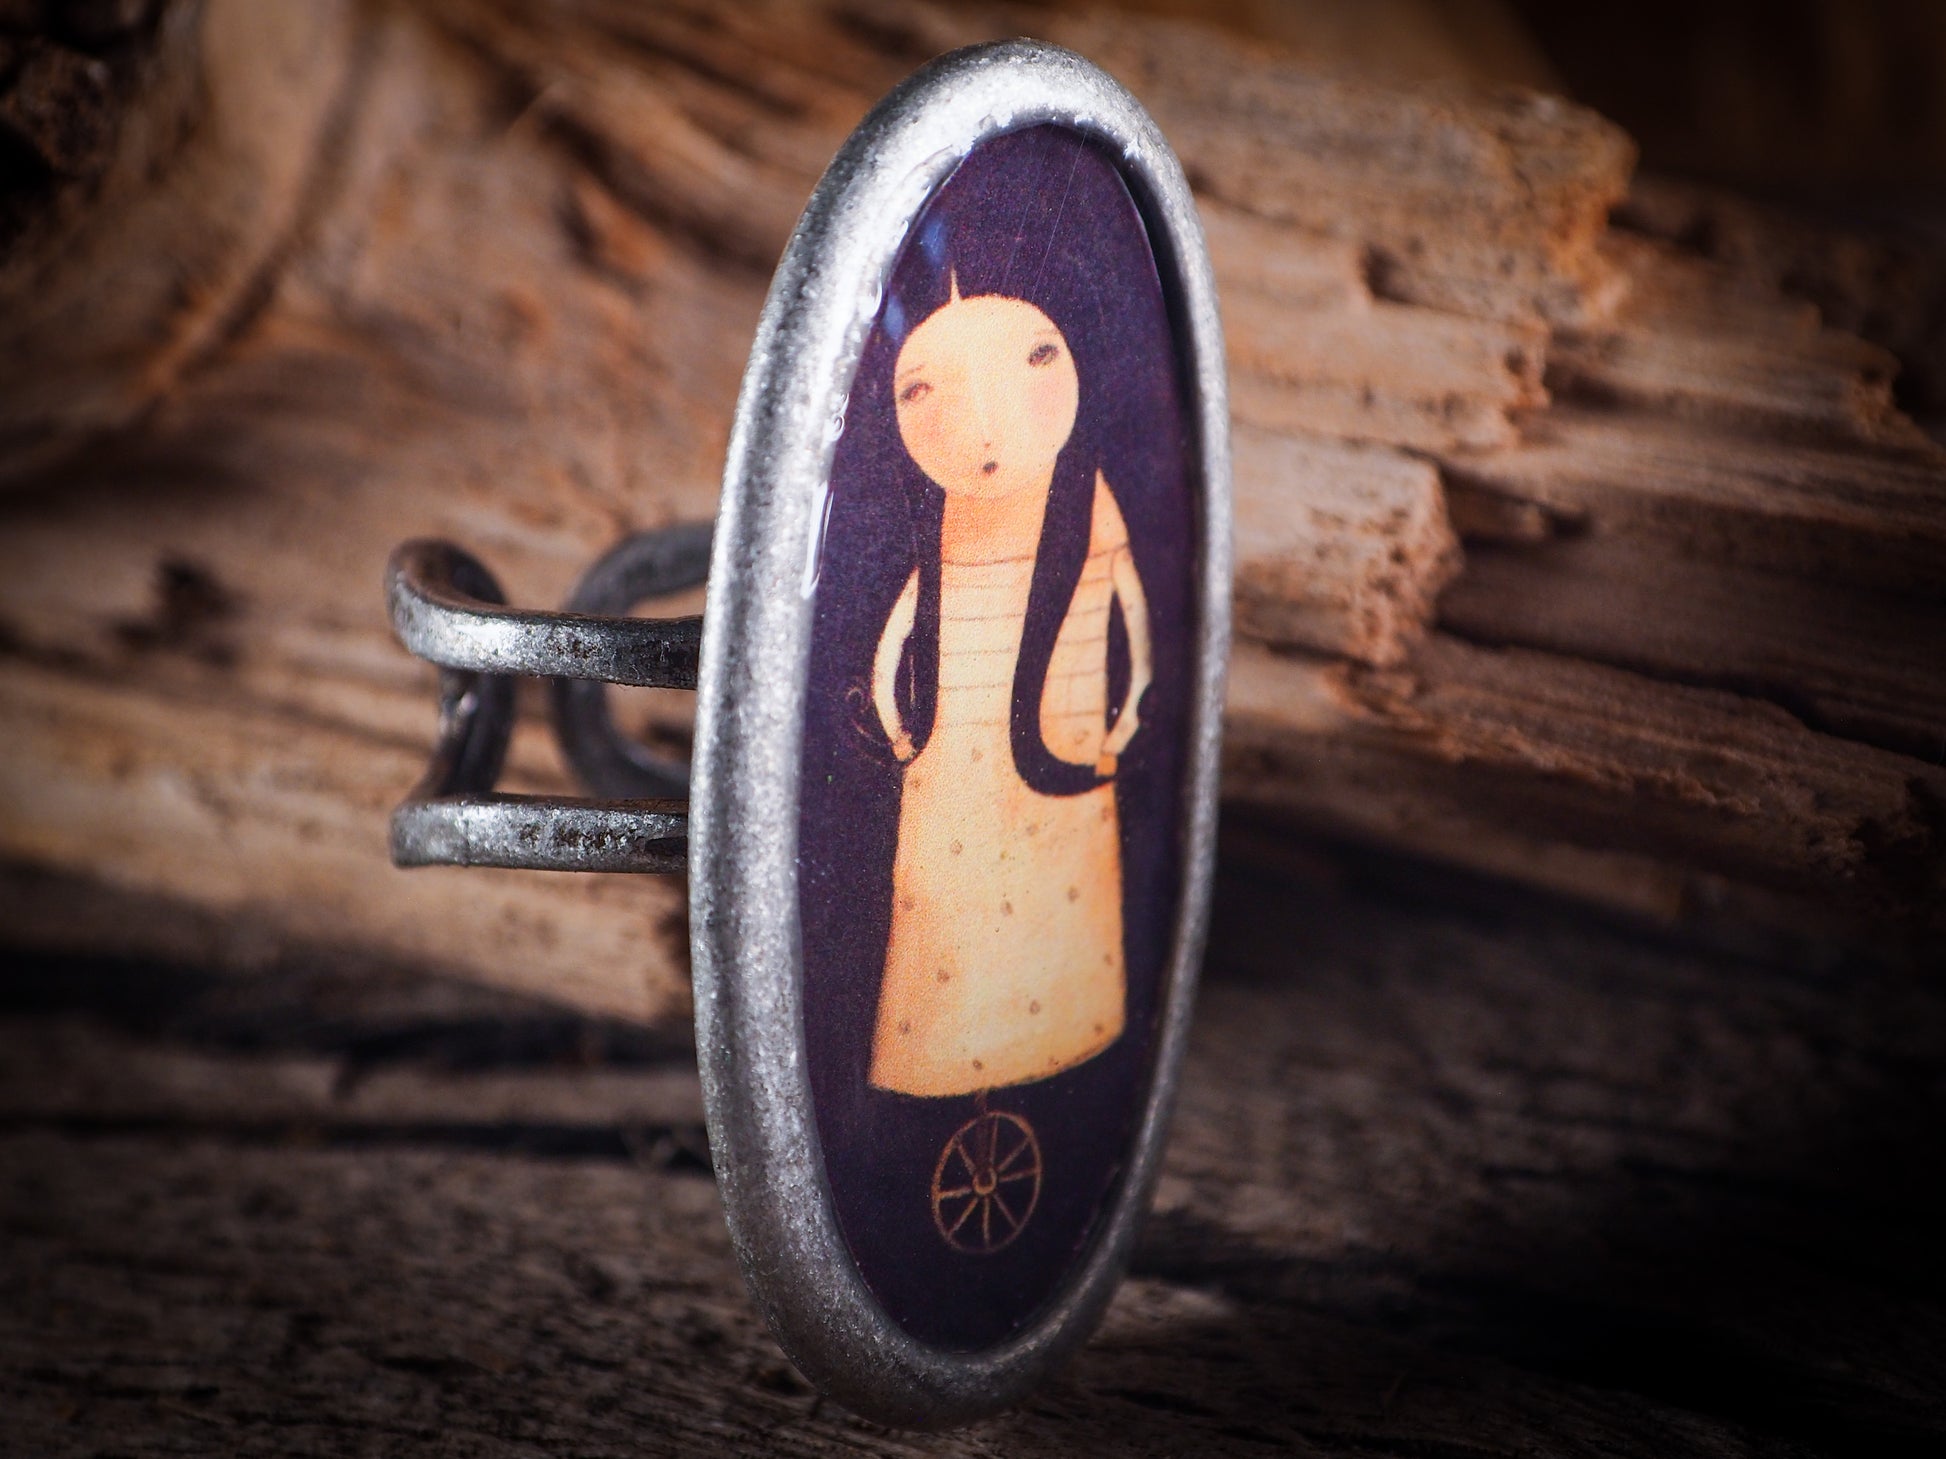 An original, one of a kind handmade jewelry by Idania Salcido, the artist behind Danita Art. Adjustable ring to different finger sizes, the oval image will create a statement of boldness and confidence that will draw looks and attention to your hands when you wear this powerful little piece with one of my favorite image.